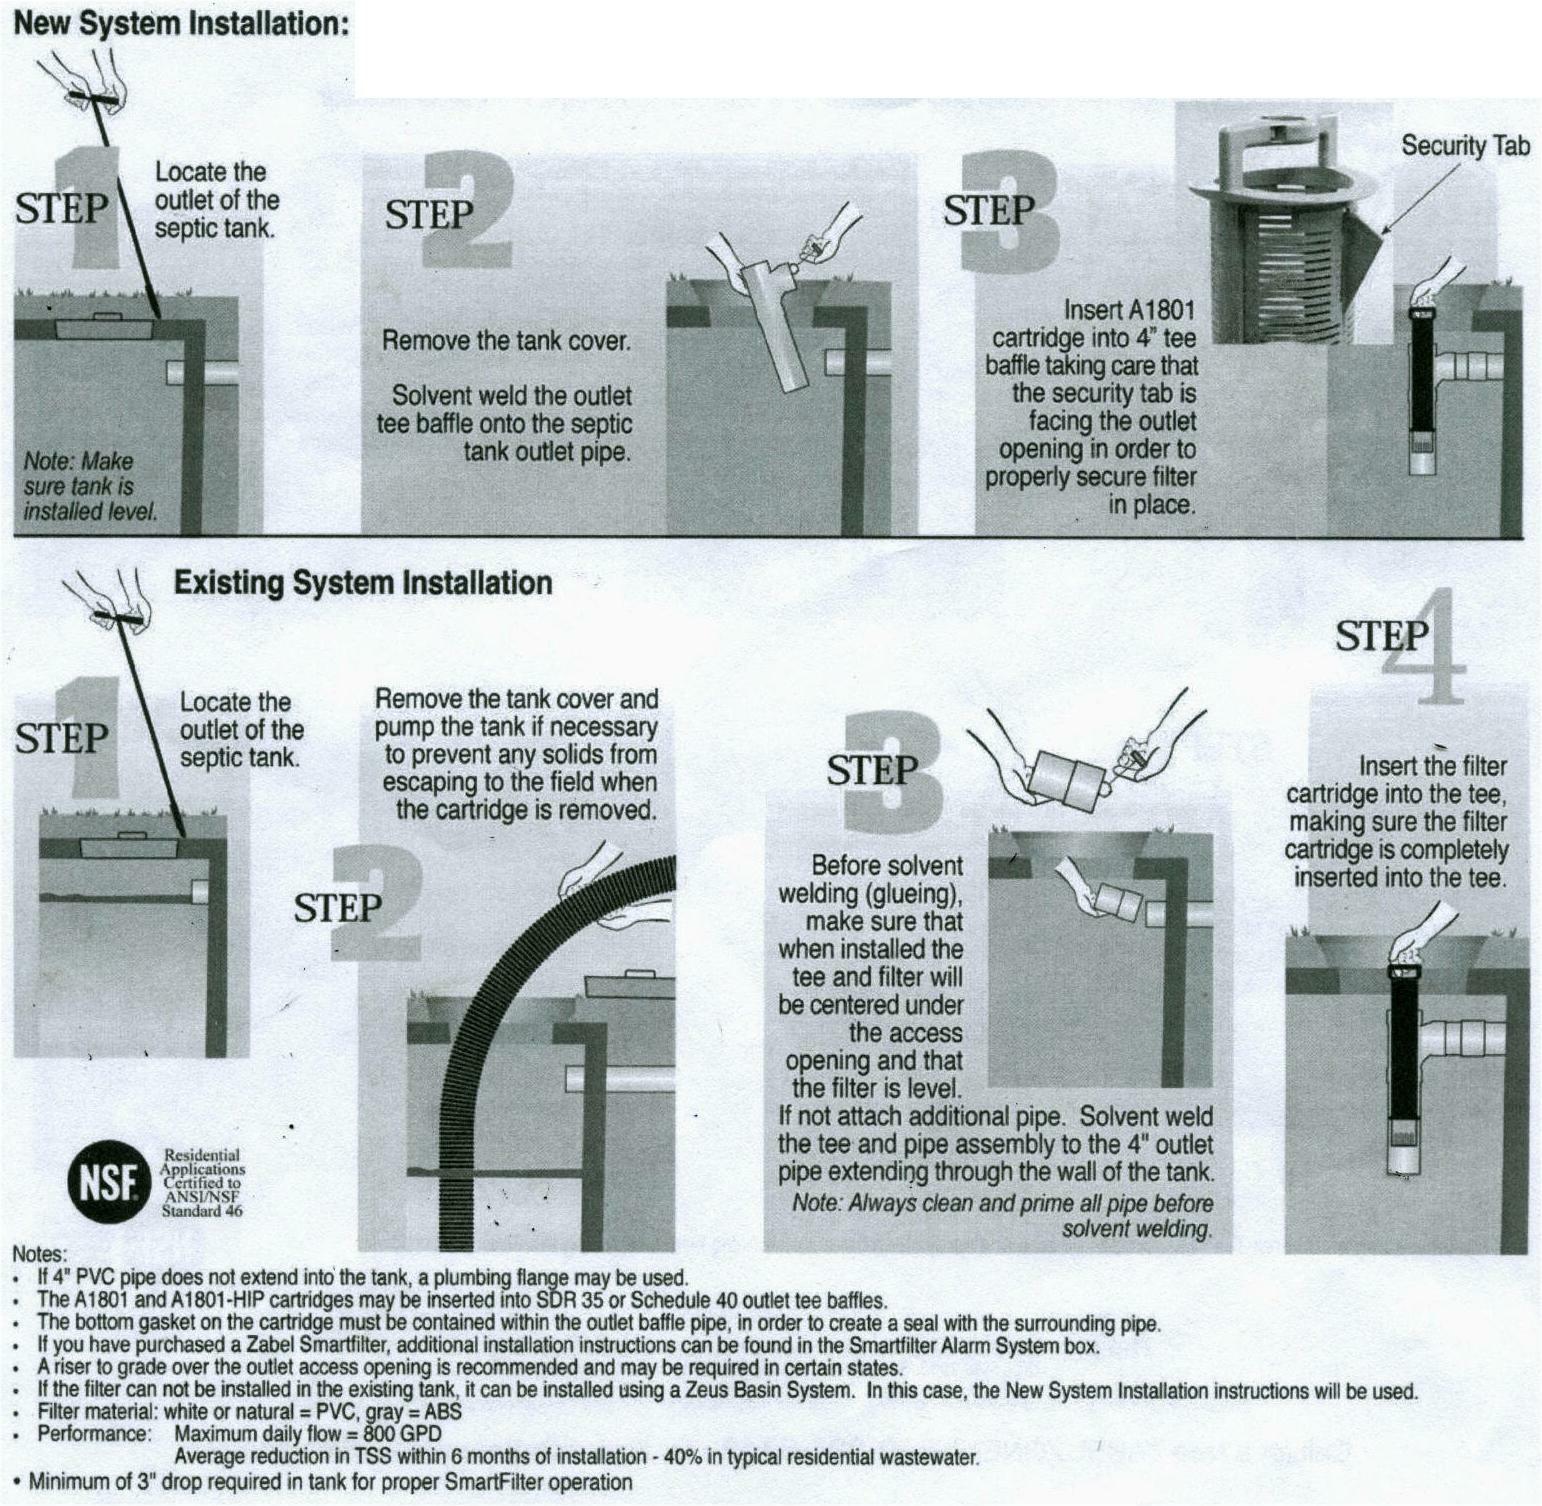 Installation instructions for life-time service, non-electric graywater disposal and greywater irrigation recycling filter 